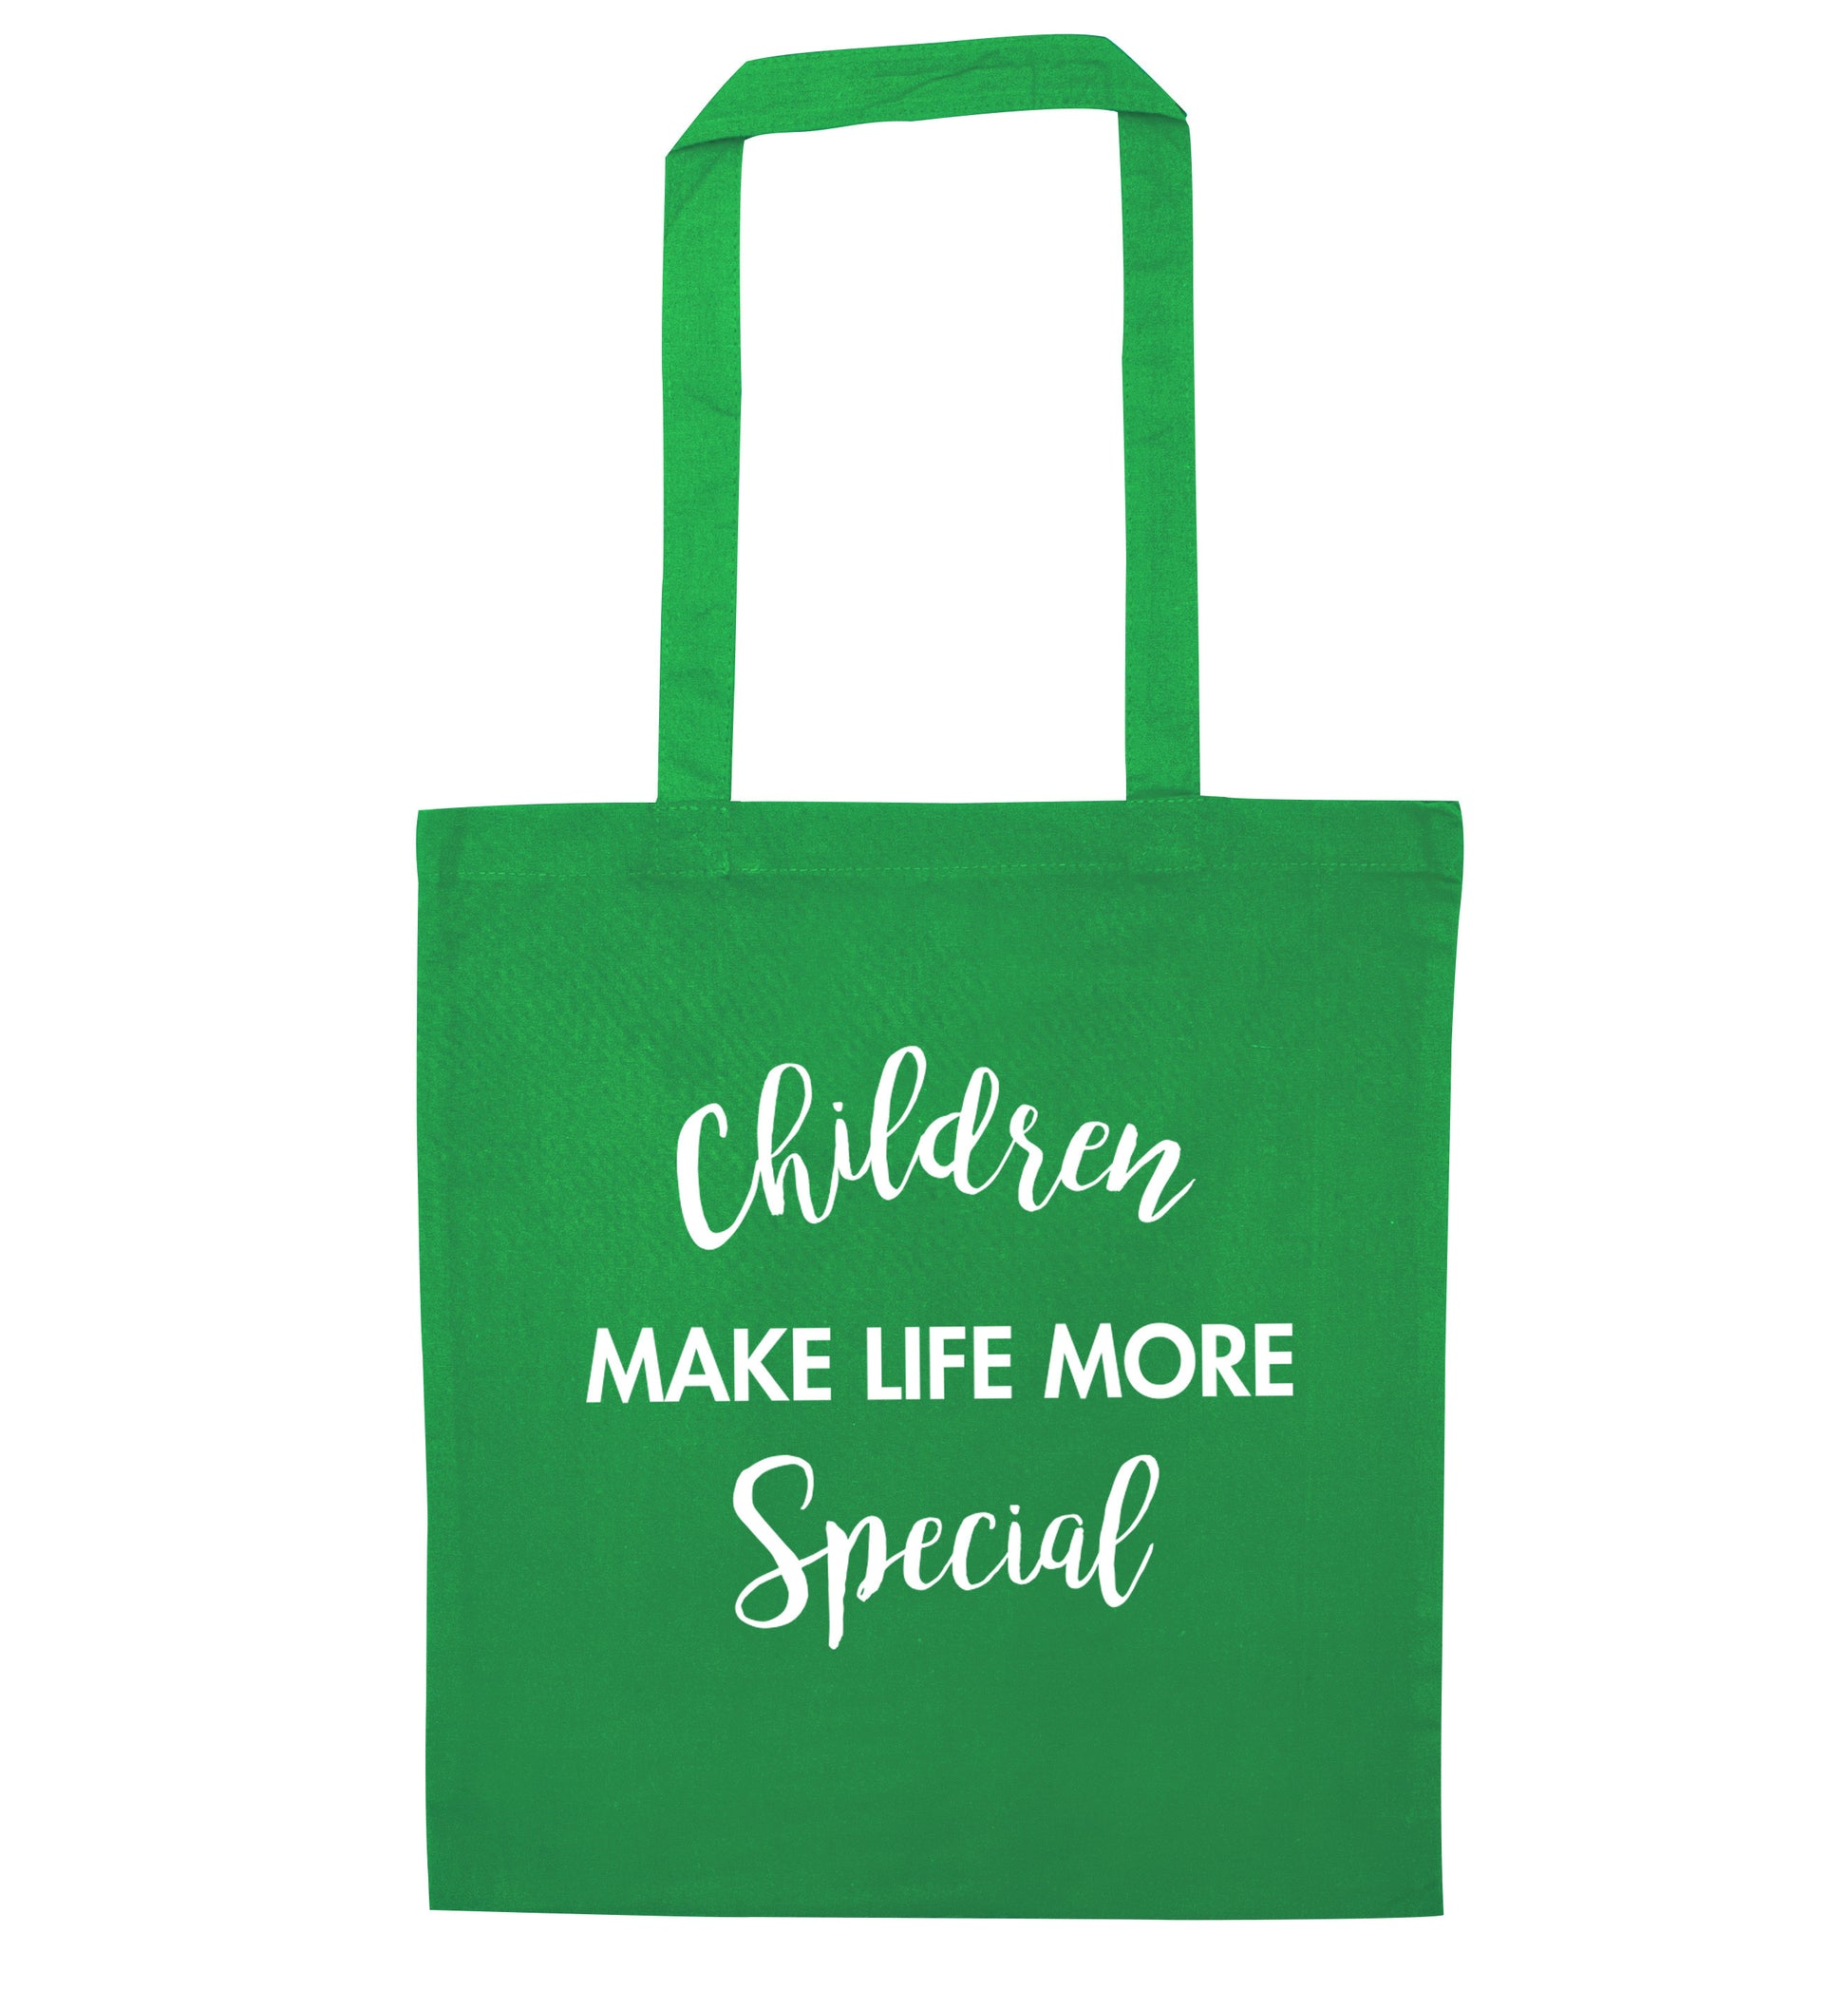 Children make life more special green tote bag